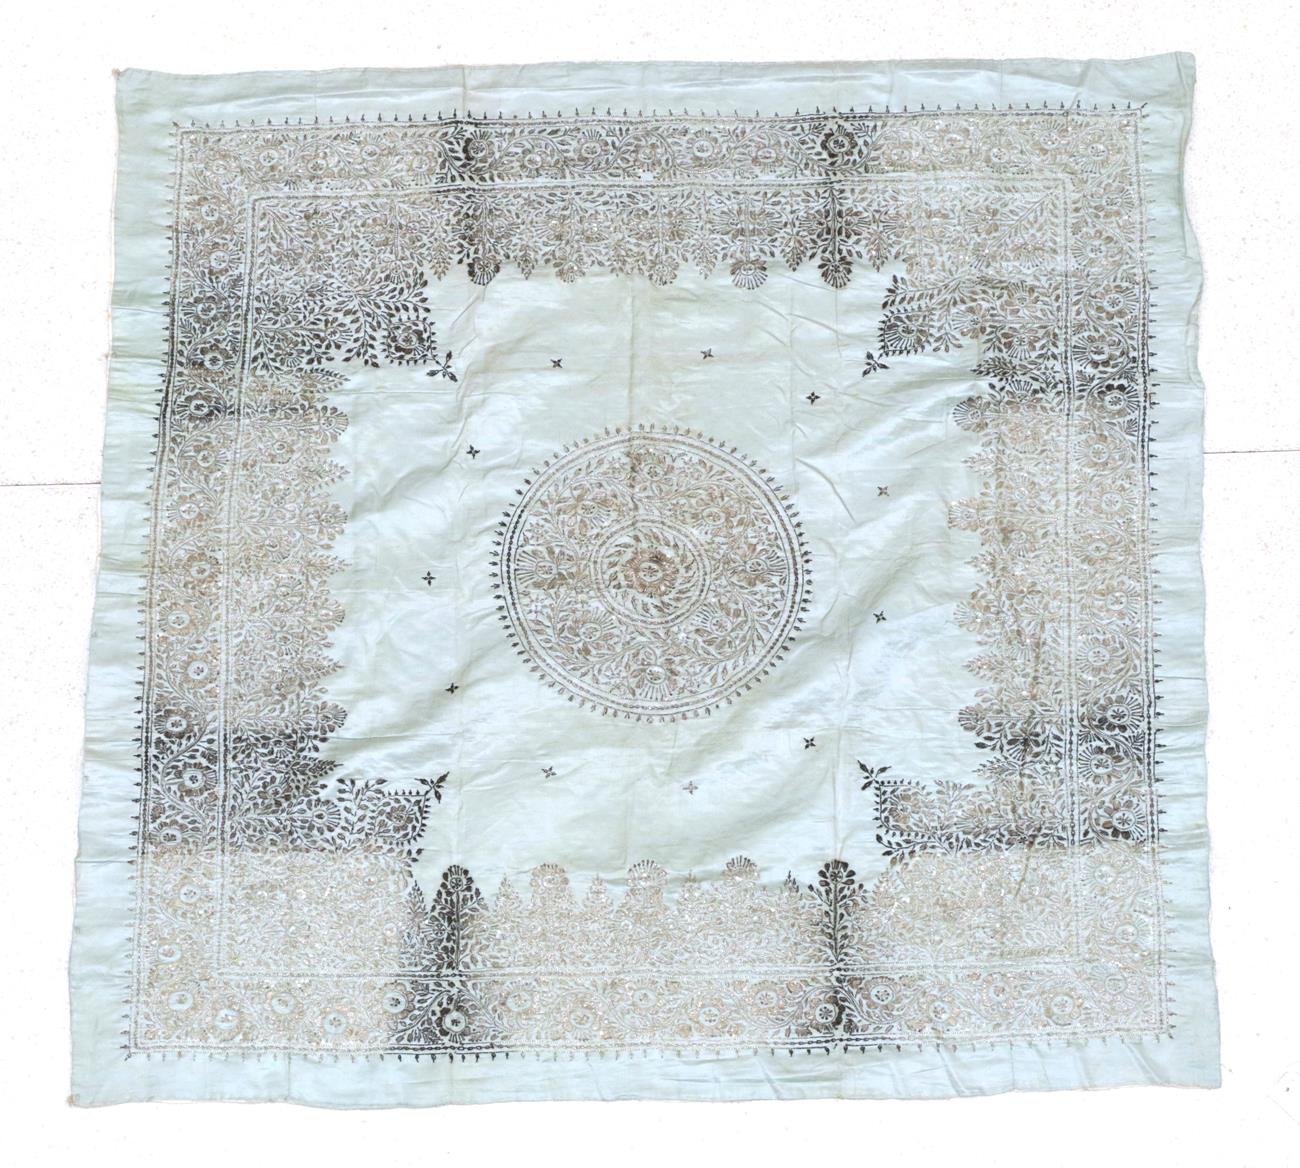 Lot 173 - Indian Silk and Metal Thread Embroidered Panel, 20th century The pale aquamarine field with central